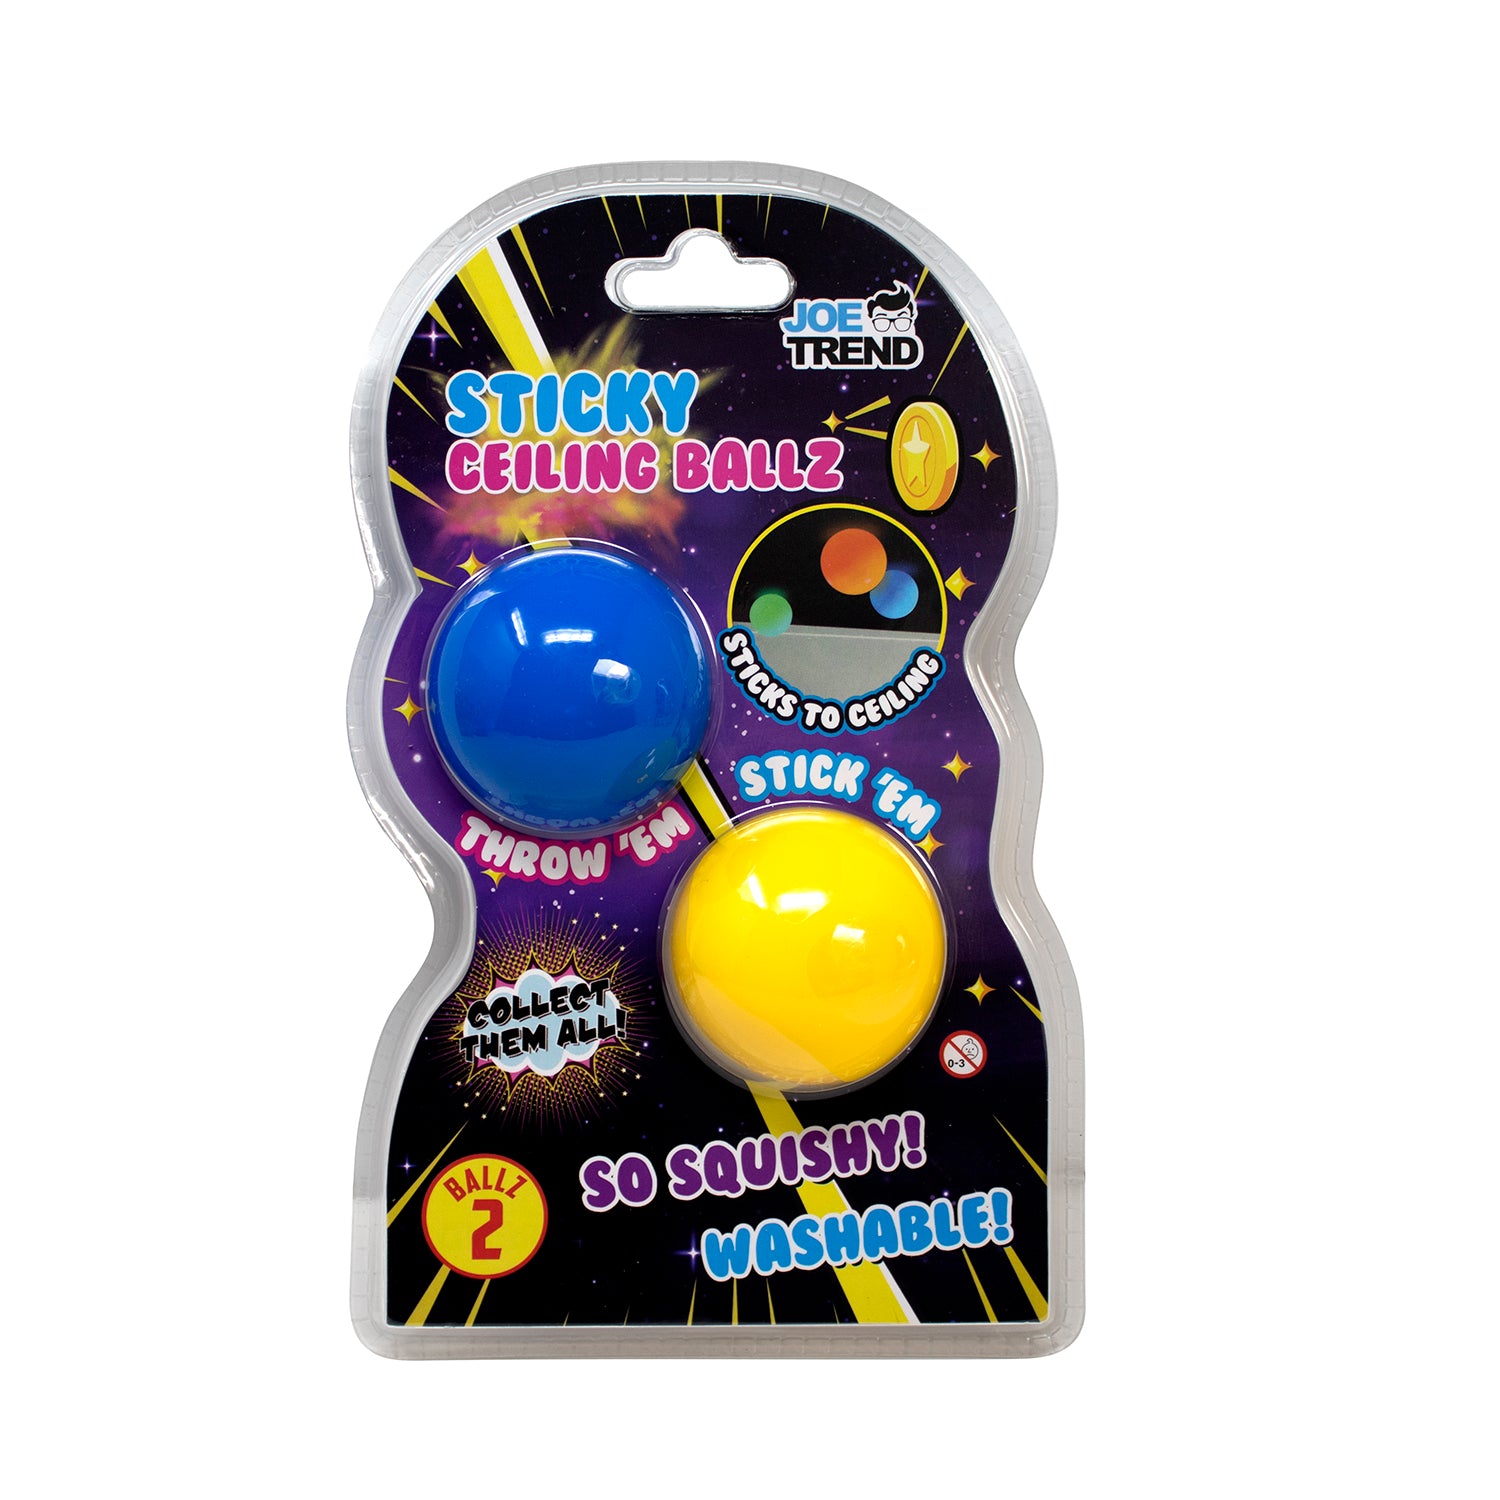 Sticky Ceiling Balls - Blue and Yellow